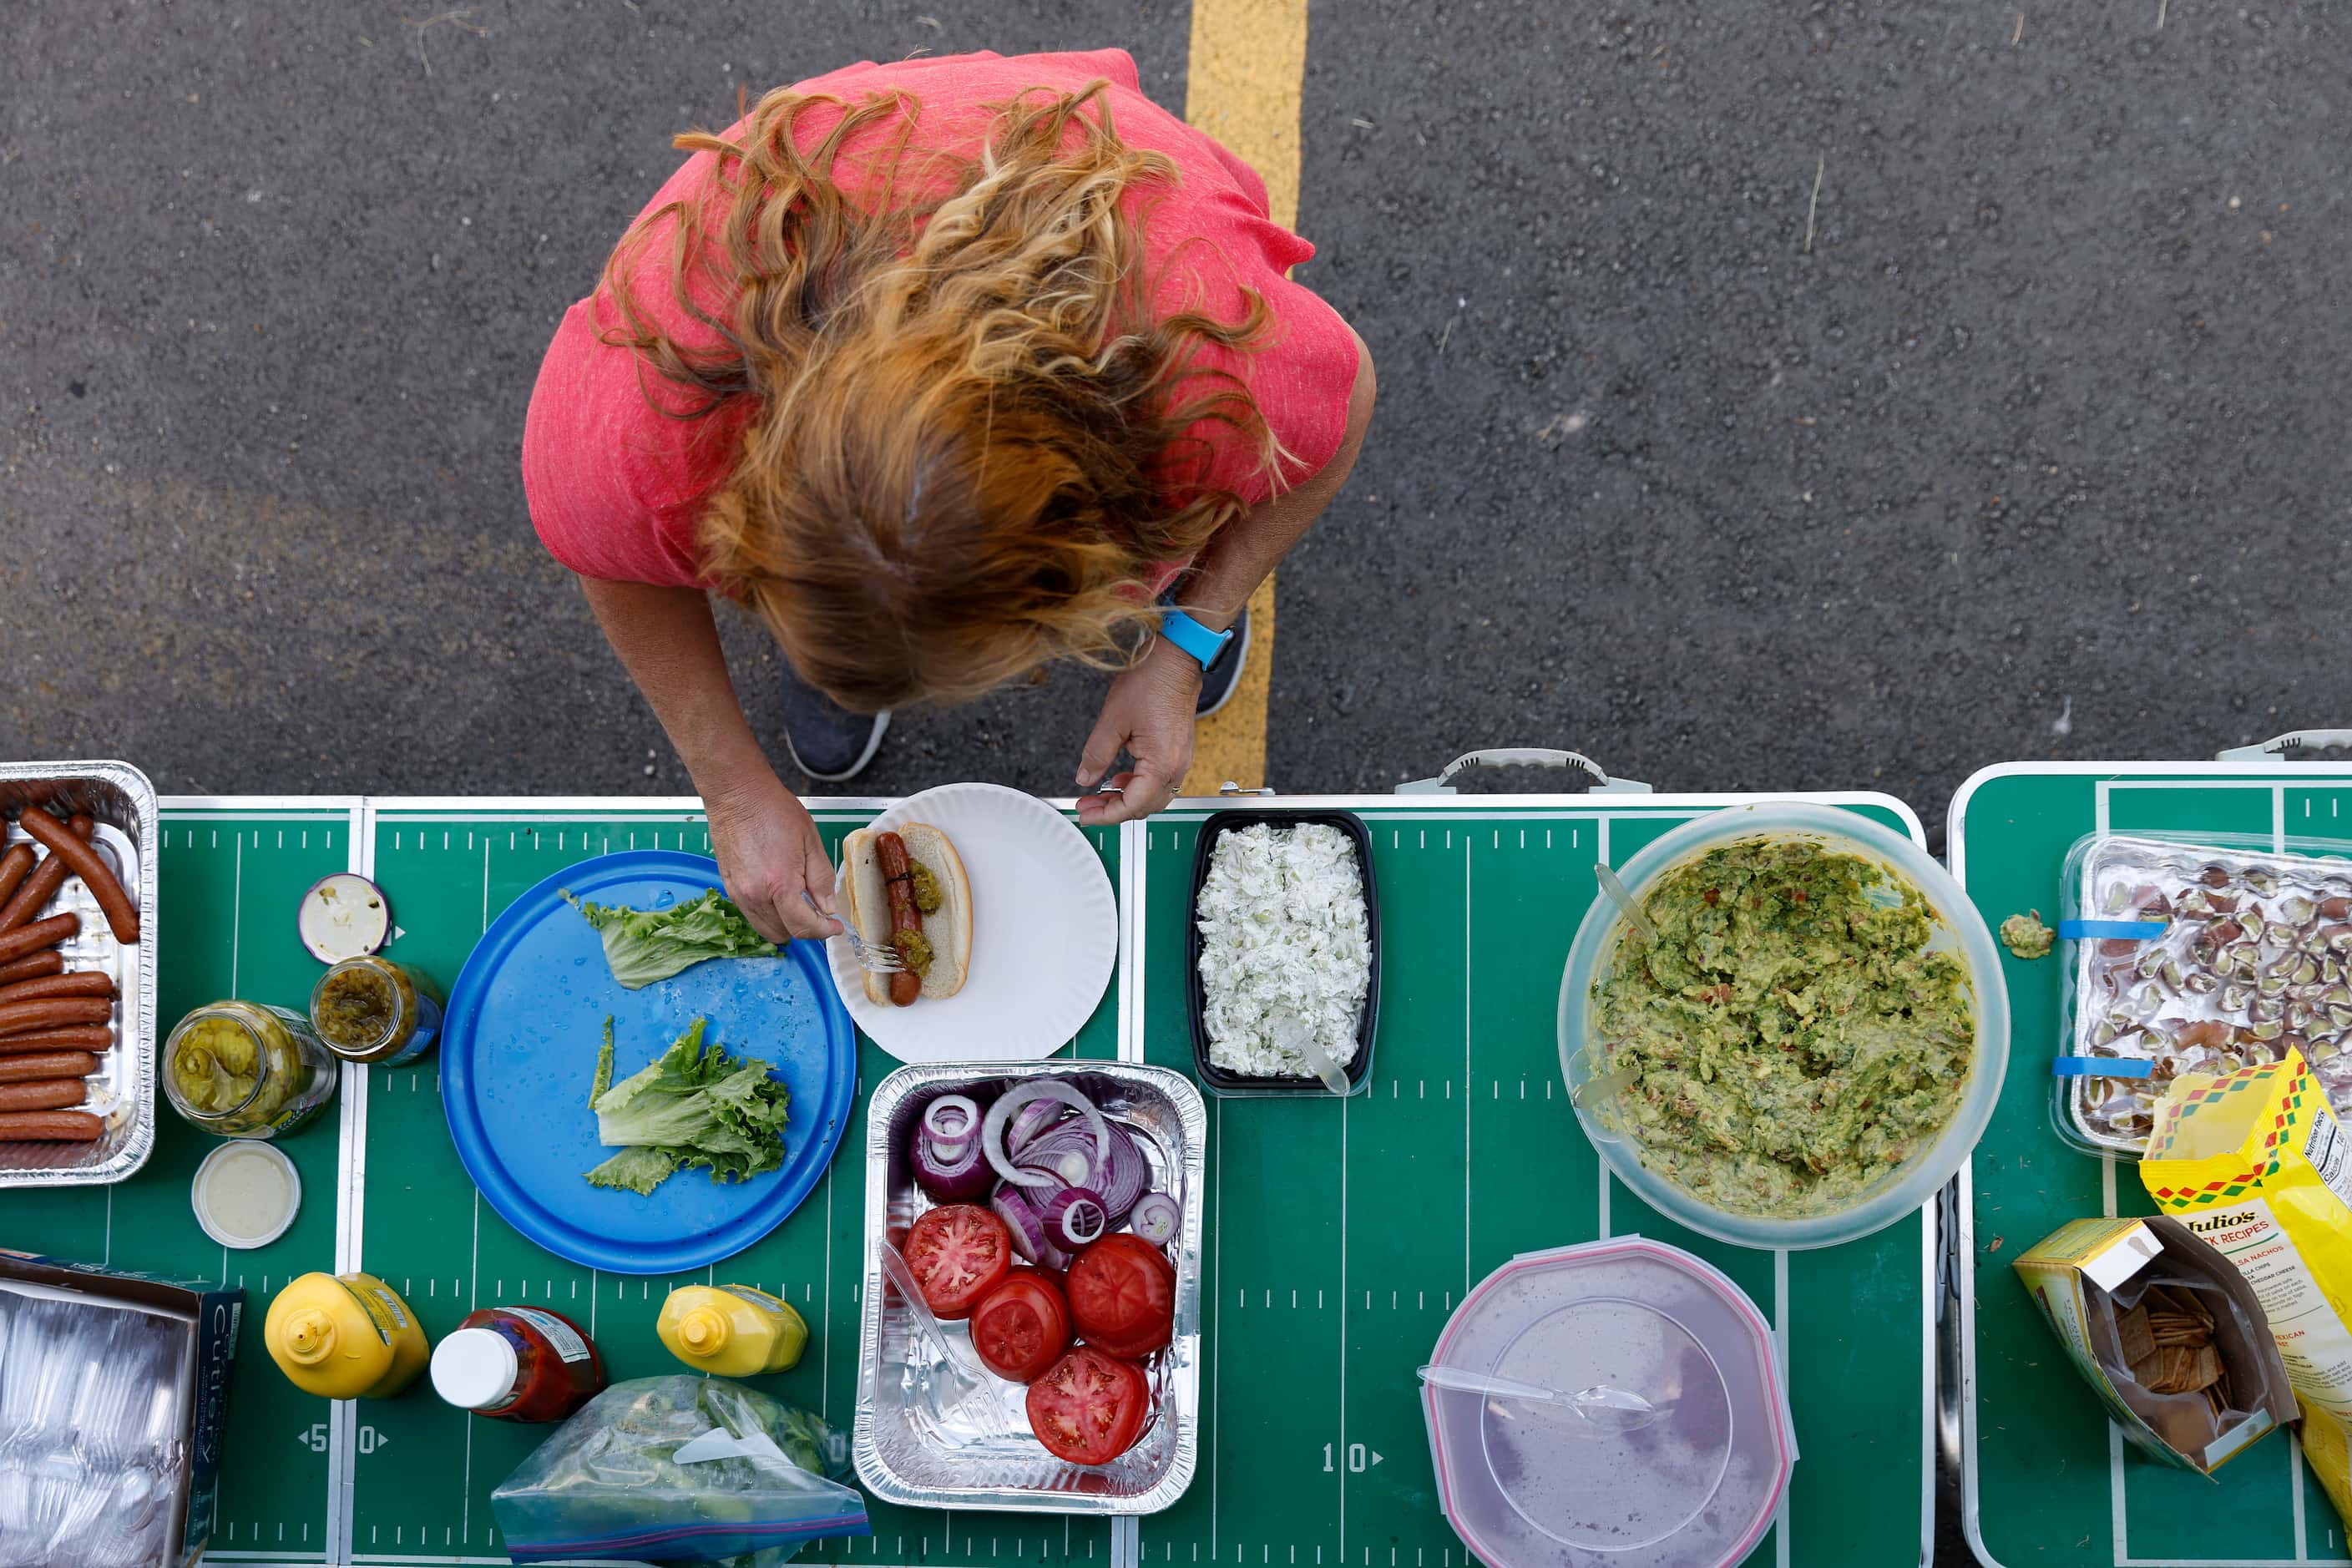 A Texas Rangers fan makes herself a lunch at an Opening Day tailgate party on private...